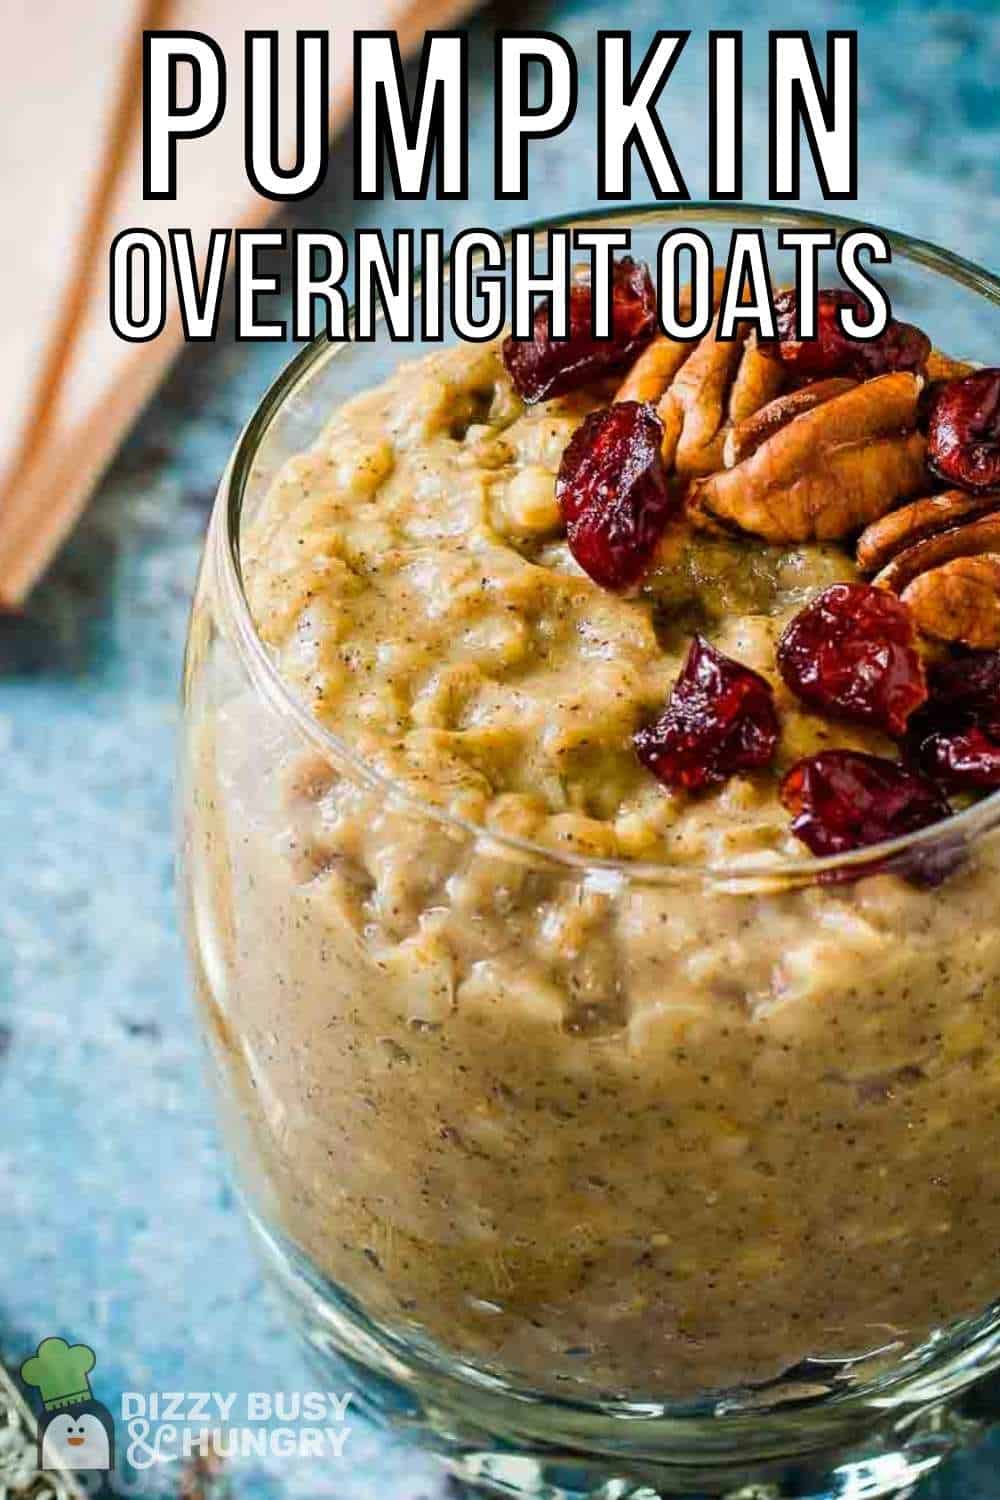 Close up shot of overnight oats in a clear glass cup garnished with pecans and cranberries on a blue speckled surface with peach colored napkins in the background.